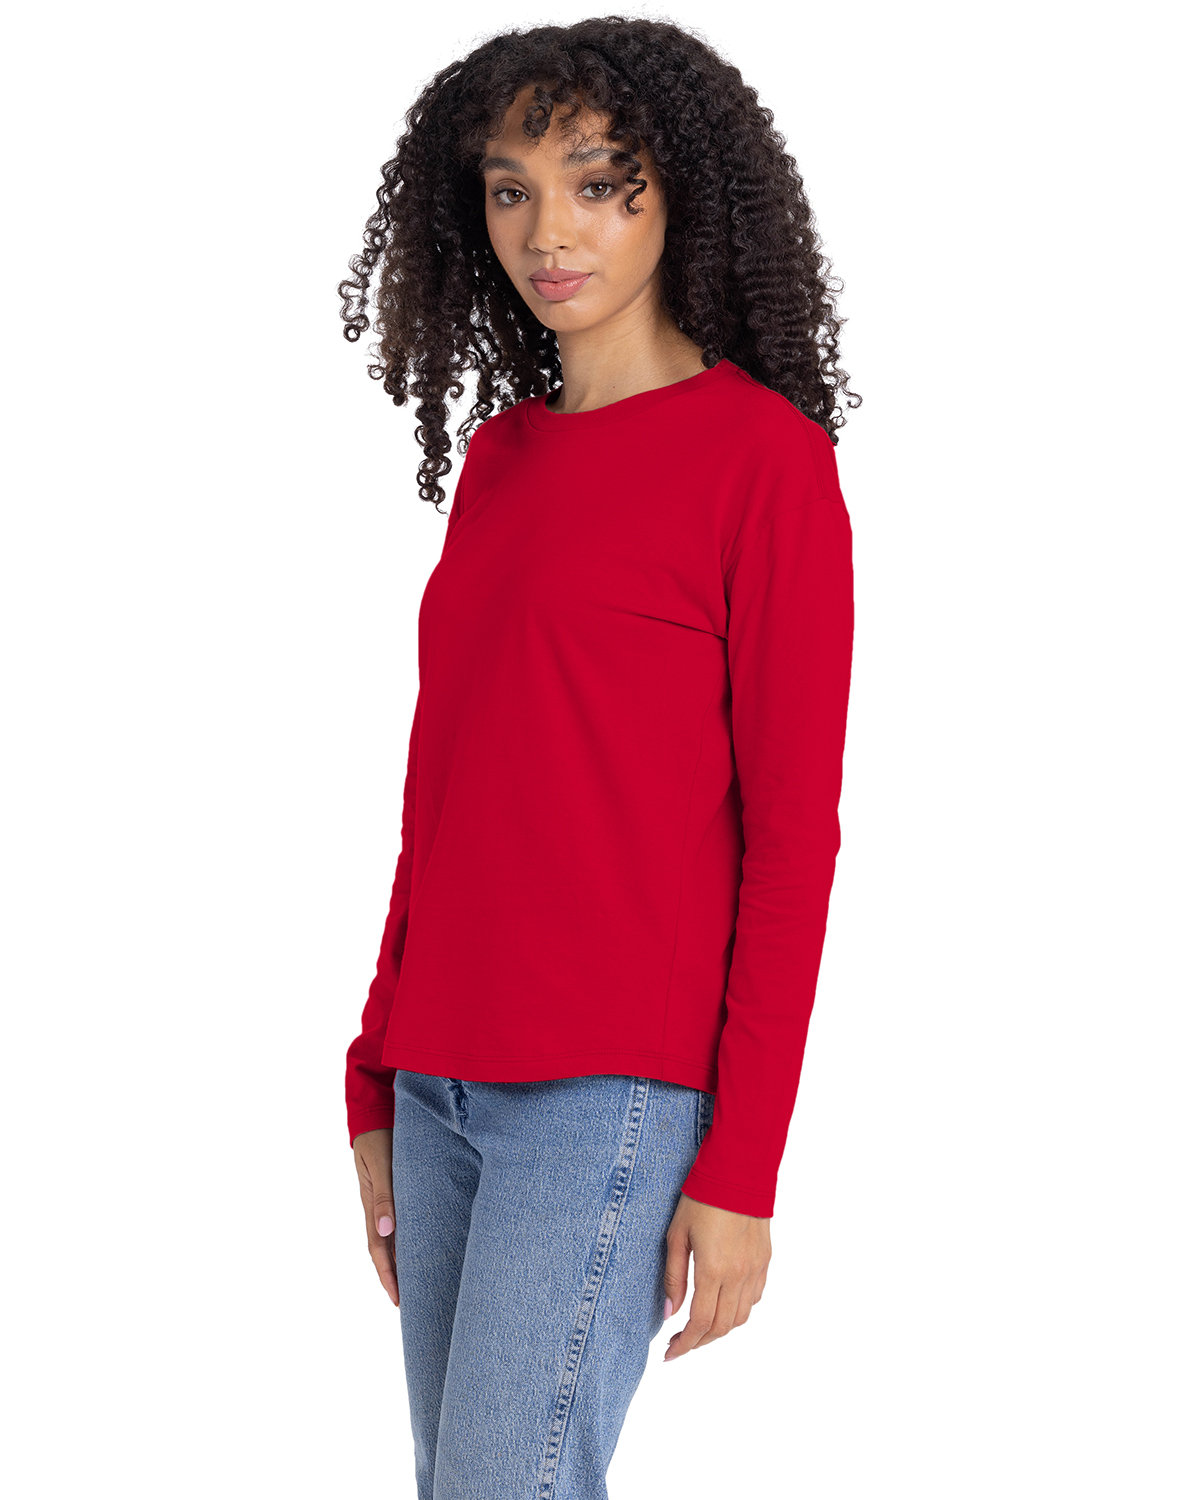 Next Level Apparel Ladies' Relaxed Long Sleeve T-Shirt | alphabroder